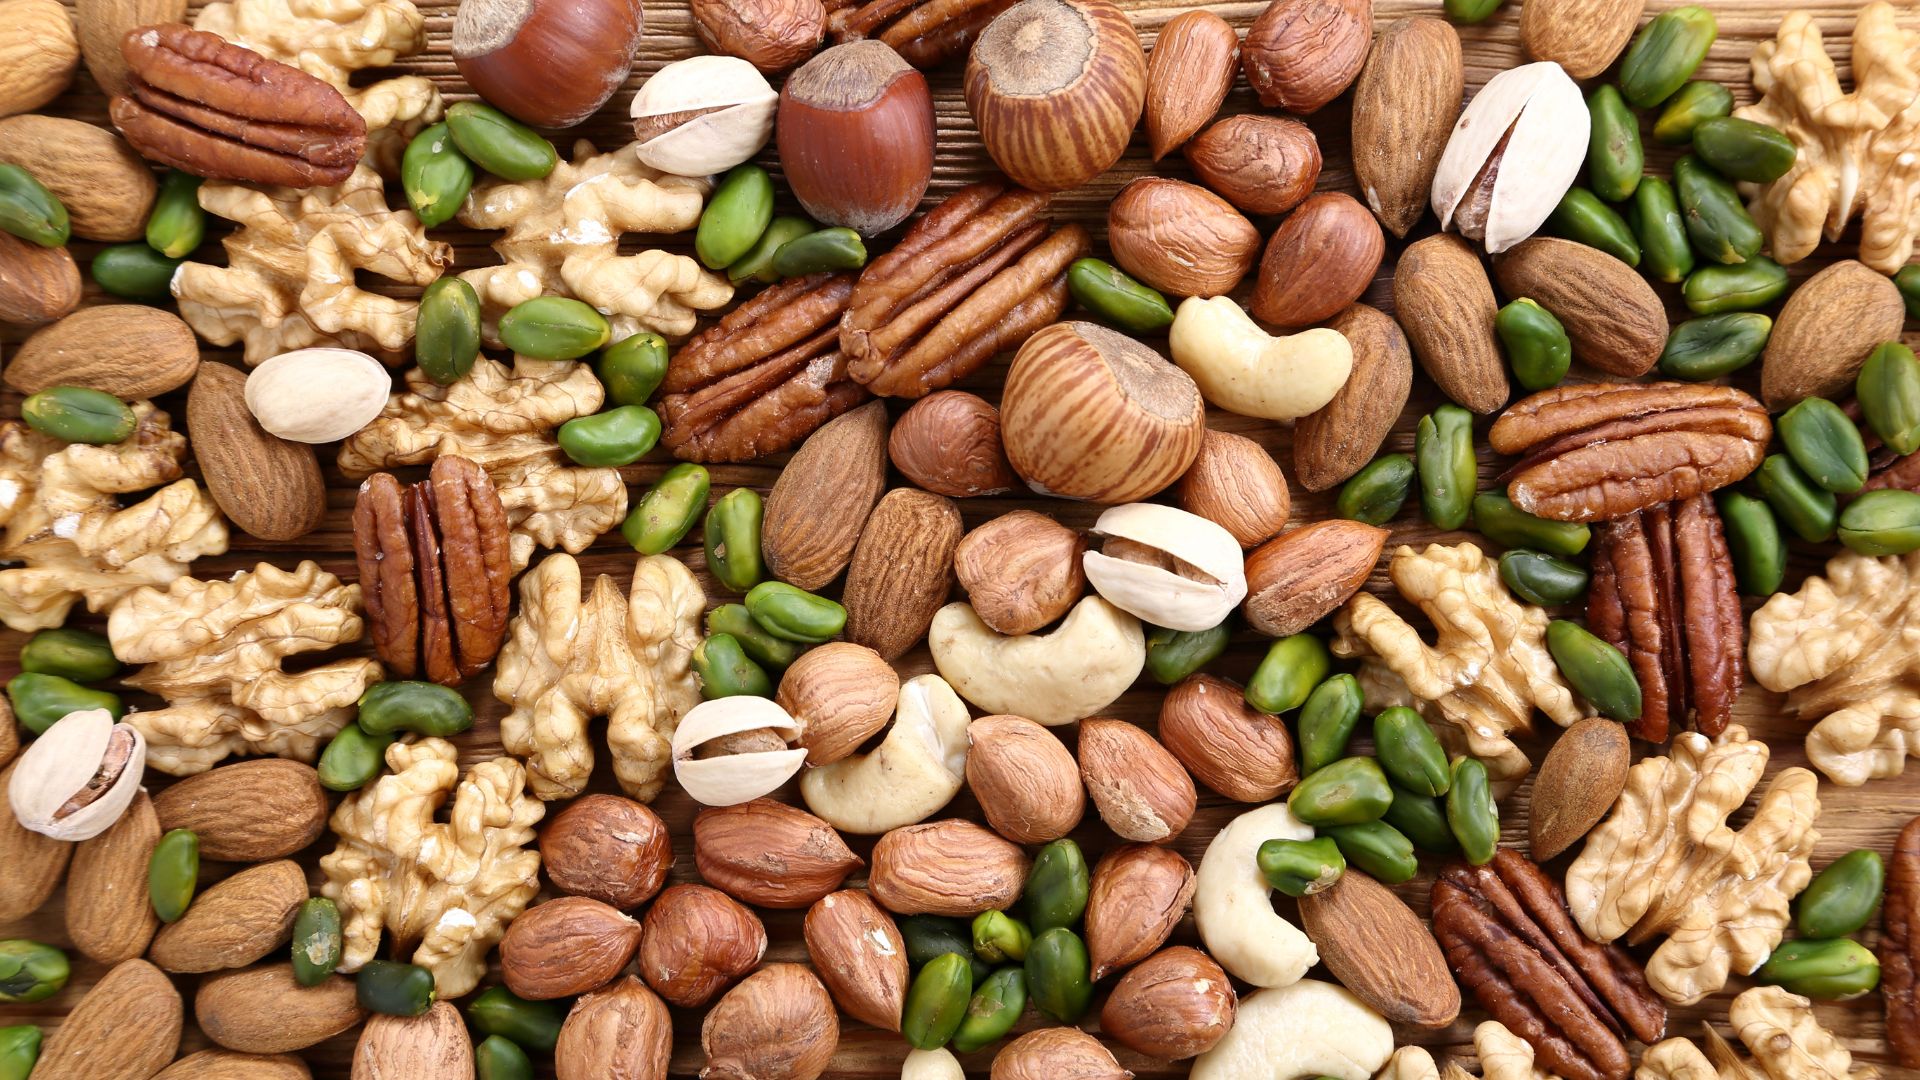 Nuts: The Nutrient-Dense Munchies